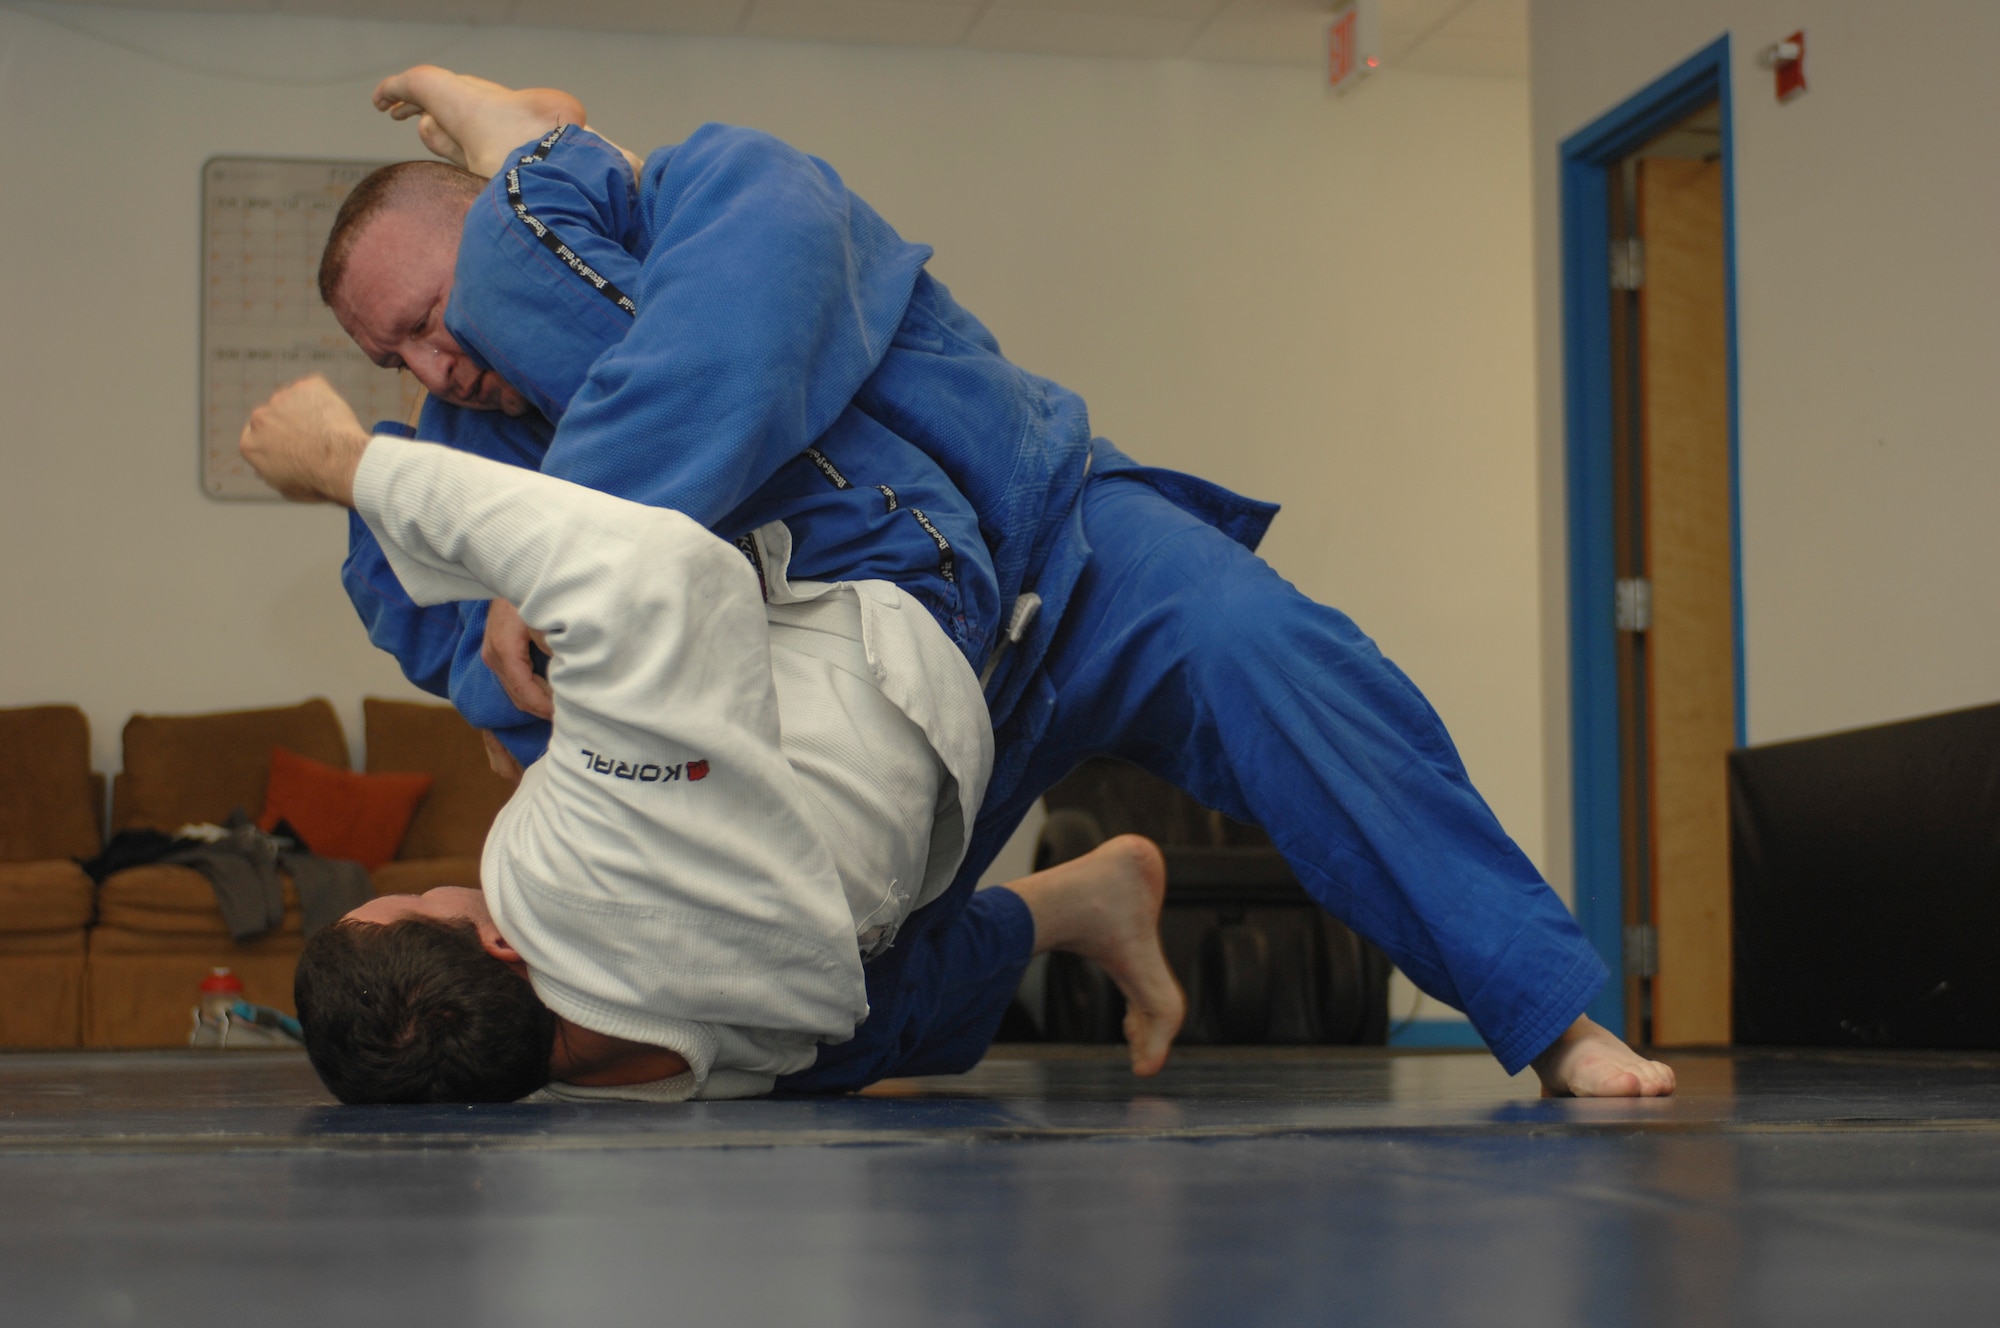 Leo Pavlushkin, 355th Security Forces Squadron lead police officer, grapples with Jariel Rivera, 355th Maintenance Group squadron lead crew member, during a Brazilian jiujitsu class at Davis-Monthan Air Force Base, Ariz., Sept. 30, 2015. The class is held Monday, Wednesday and Friday at 4:30 p.m. in the upstairs of the Airman Leadership School building 4455. (U.S. Air Force photo by Airman Basic Nathan H. Barbour/Released)